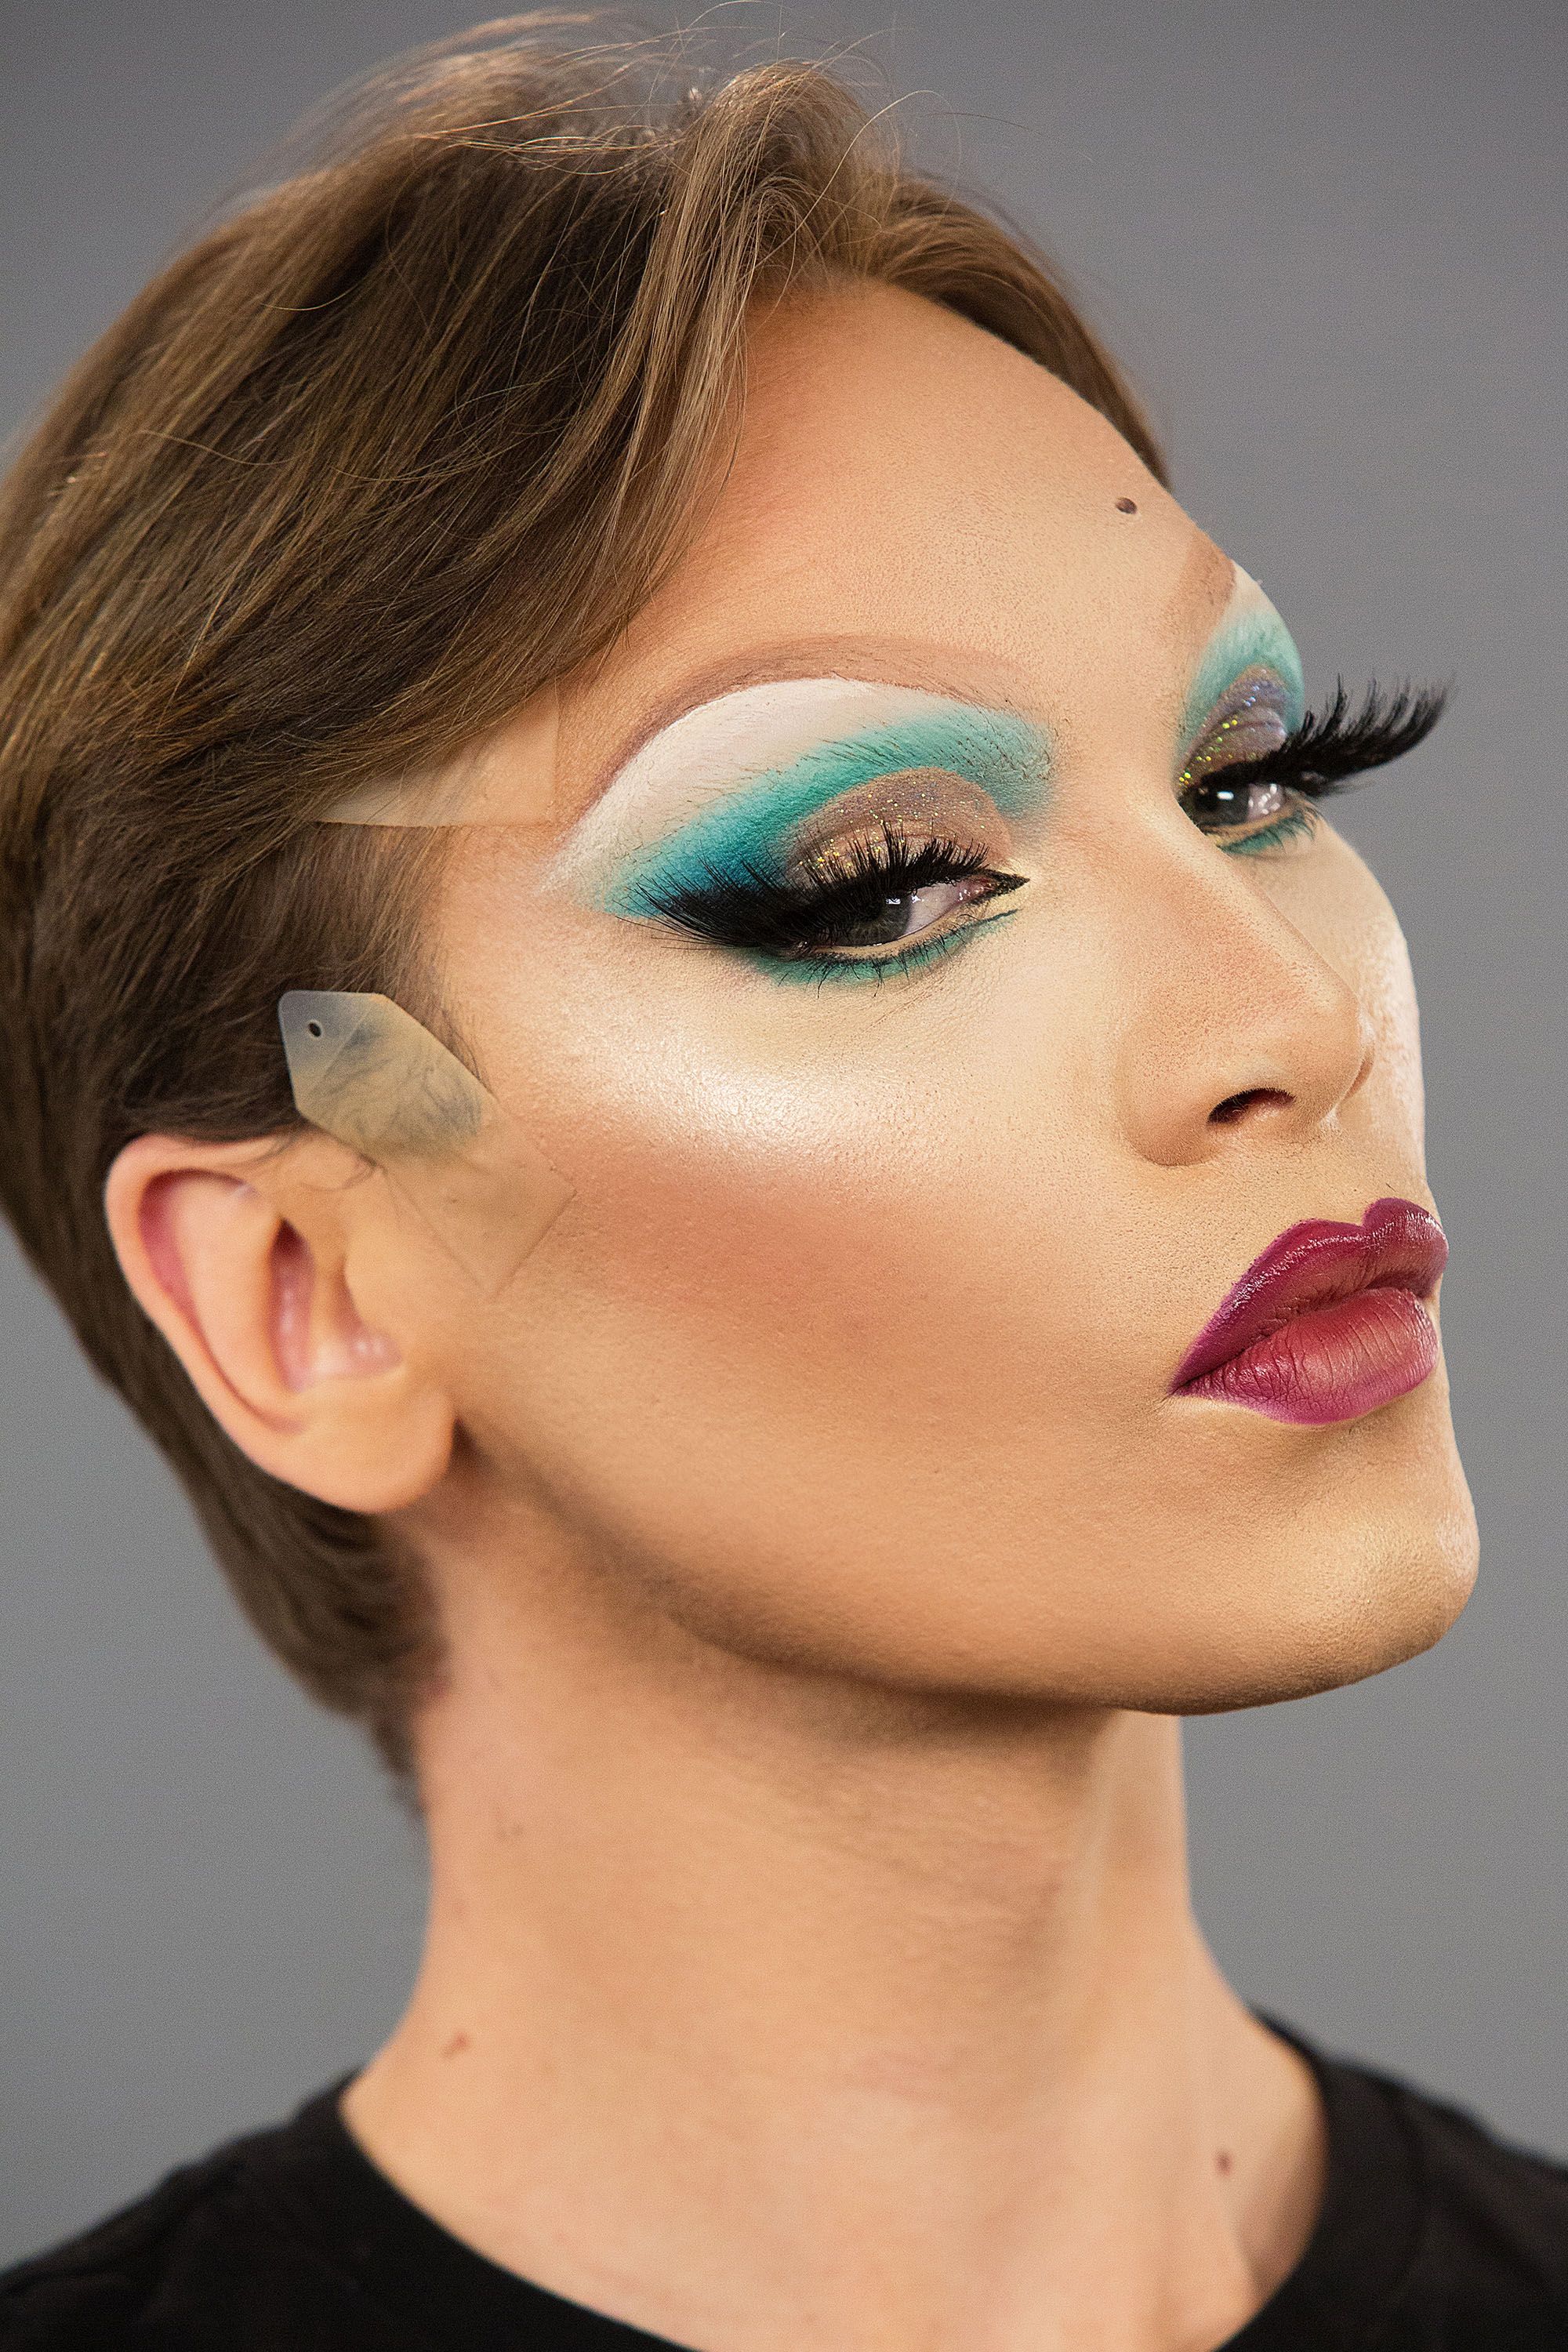 10 Life-Changing Makeup From Drag Queen Miss Fame